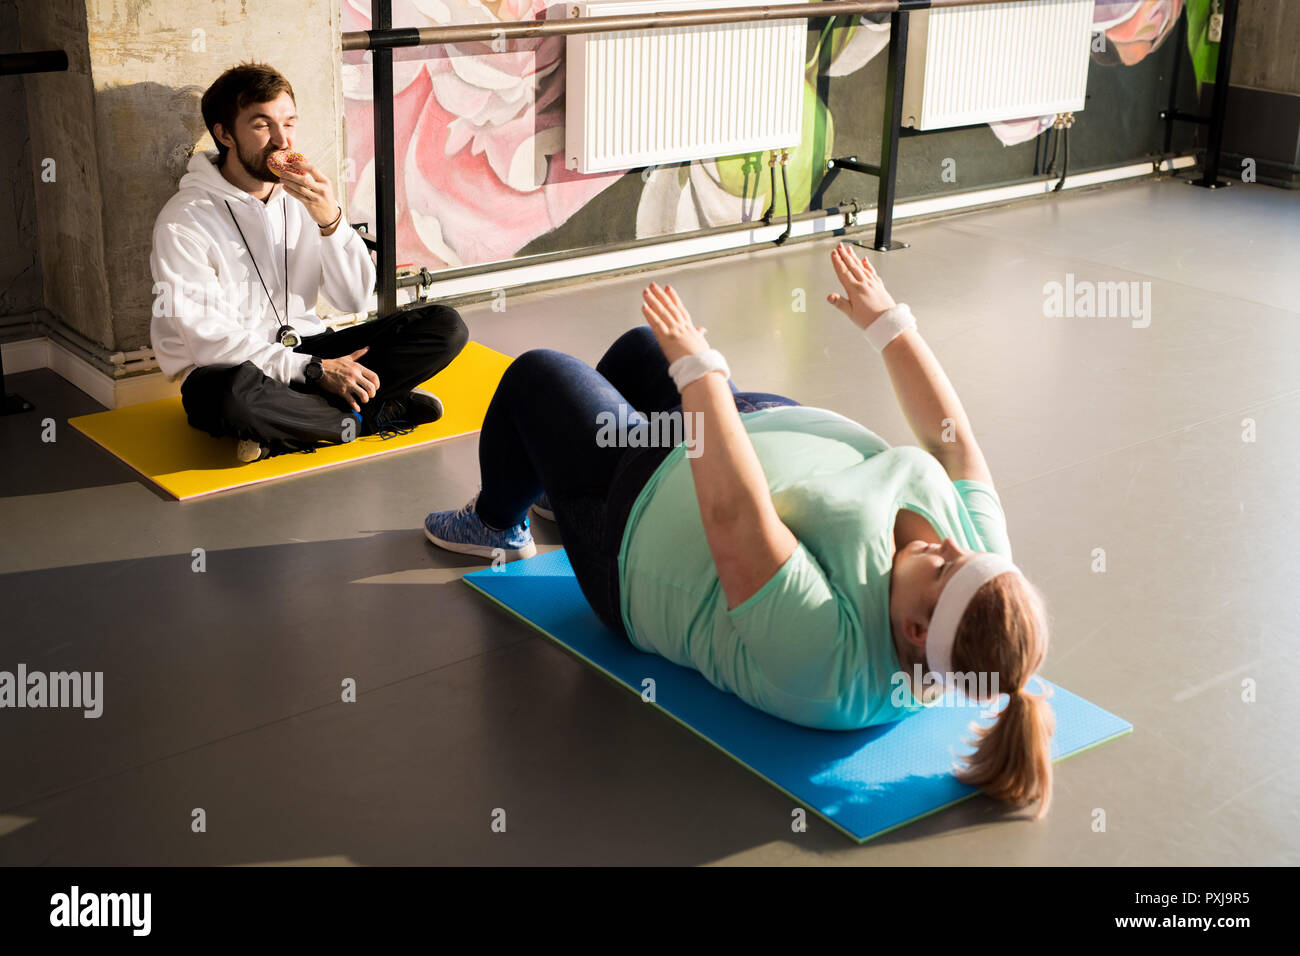 Obese Woman Working Out Stock Photo